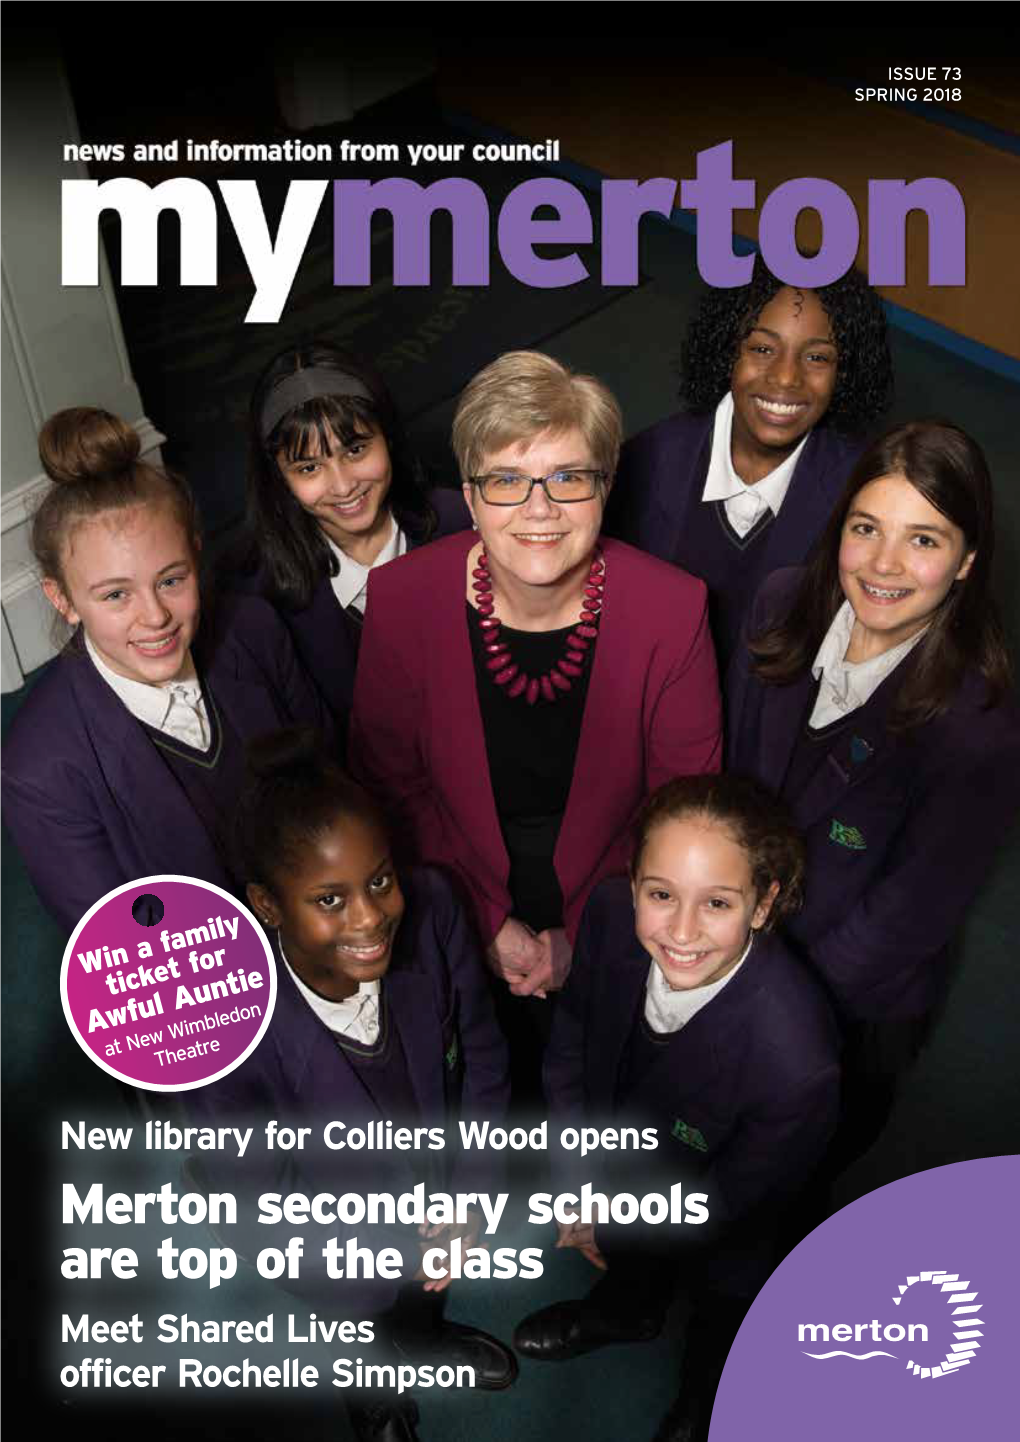 Merton Secondary Schools Are Top of the Class Meet Shared Lives Officer Rochelle Simpson 2